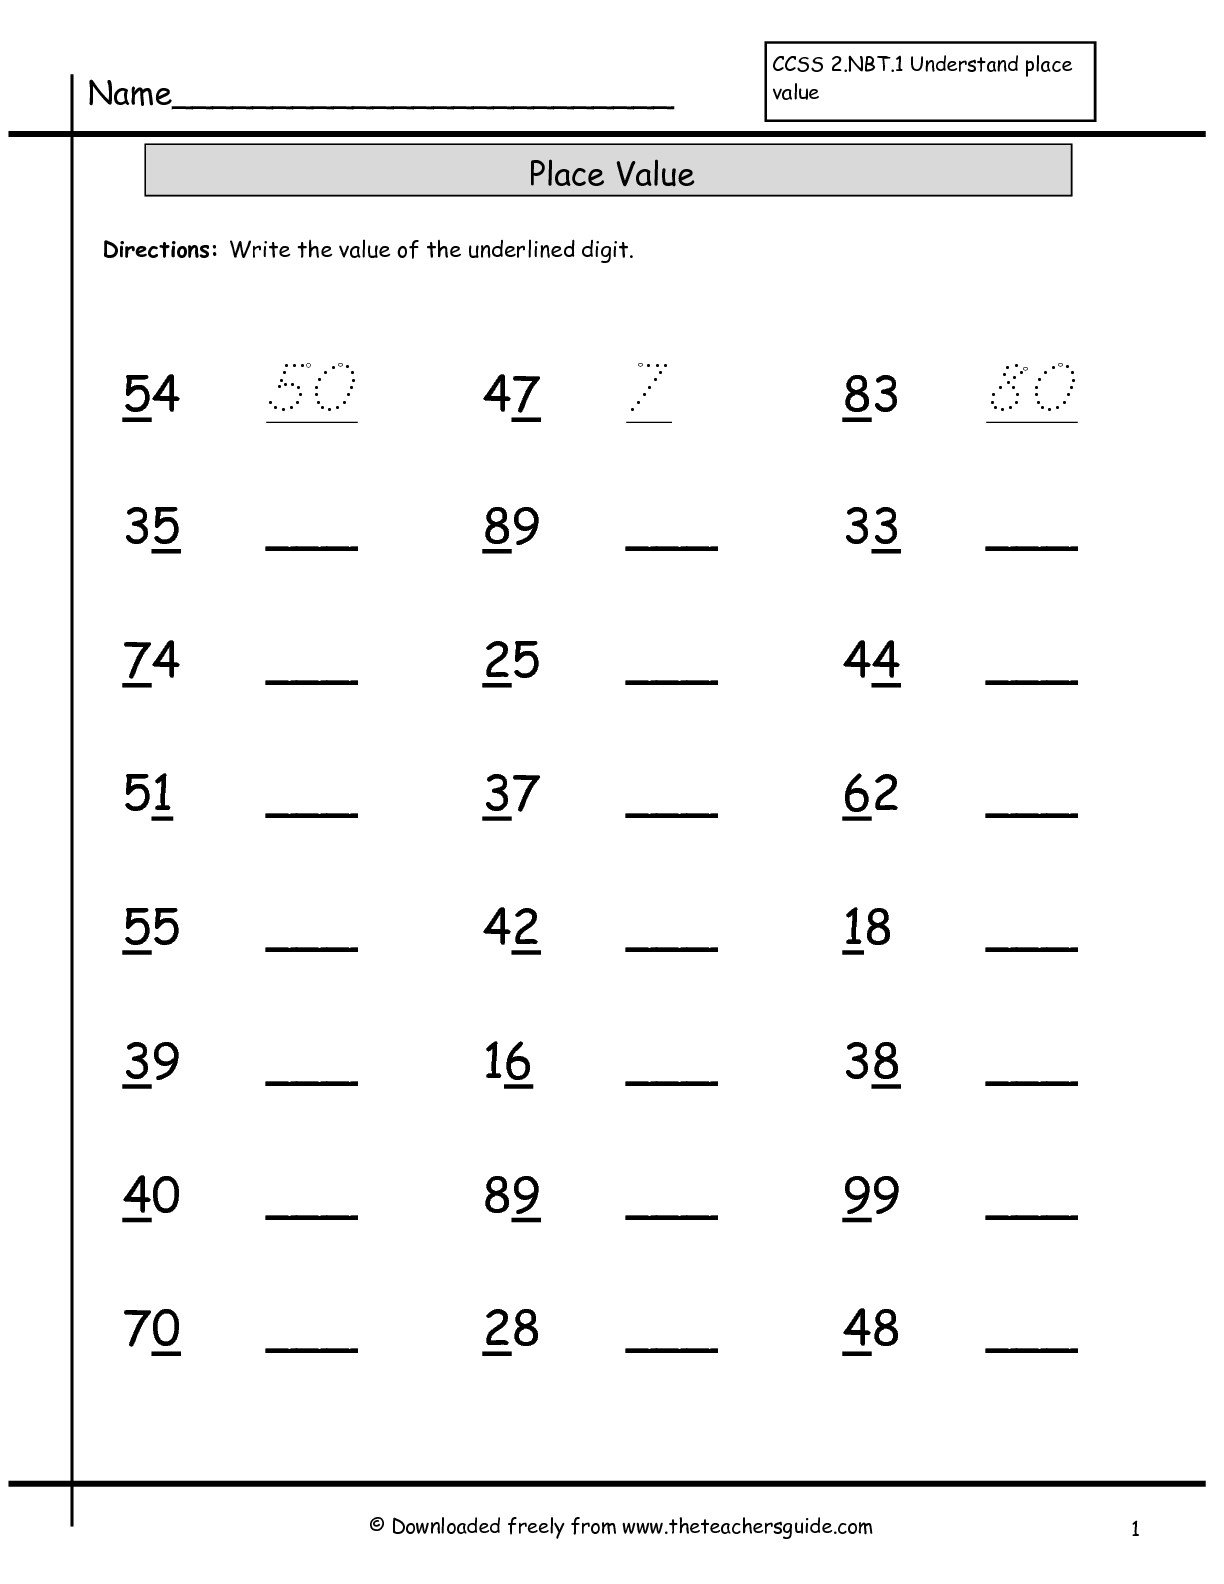 Place Value Worksheets From The Teacher's Guide Also Place Value Worksheets For Kindergarten